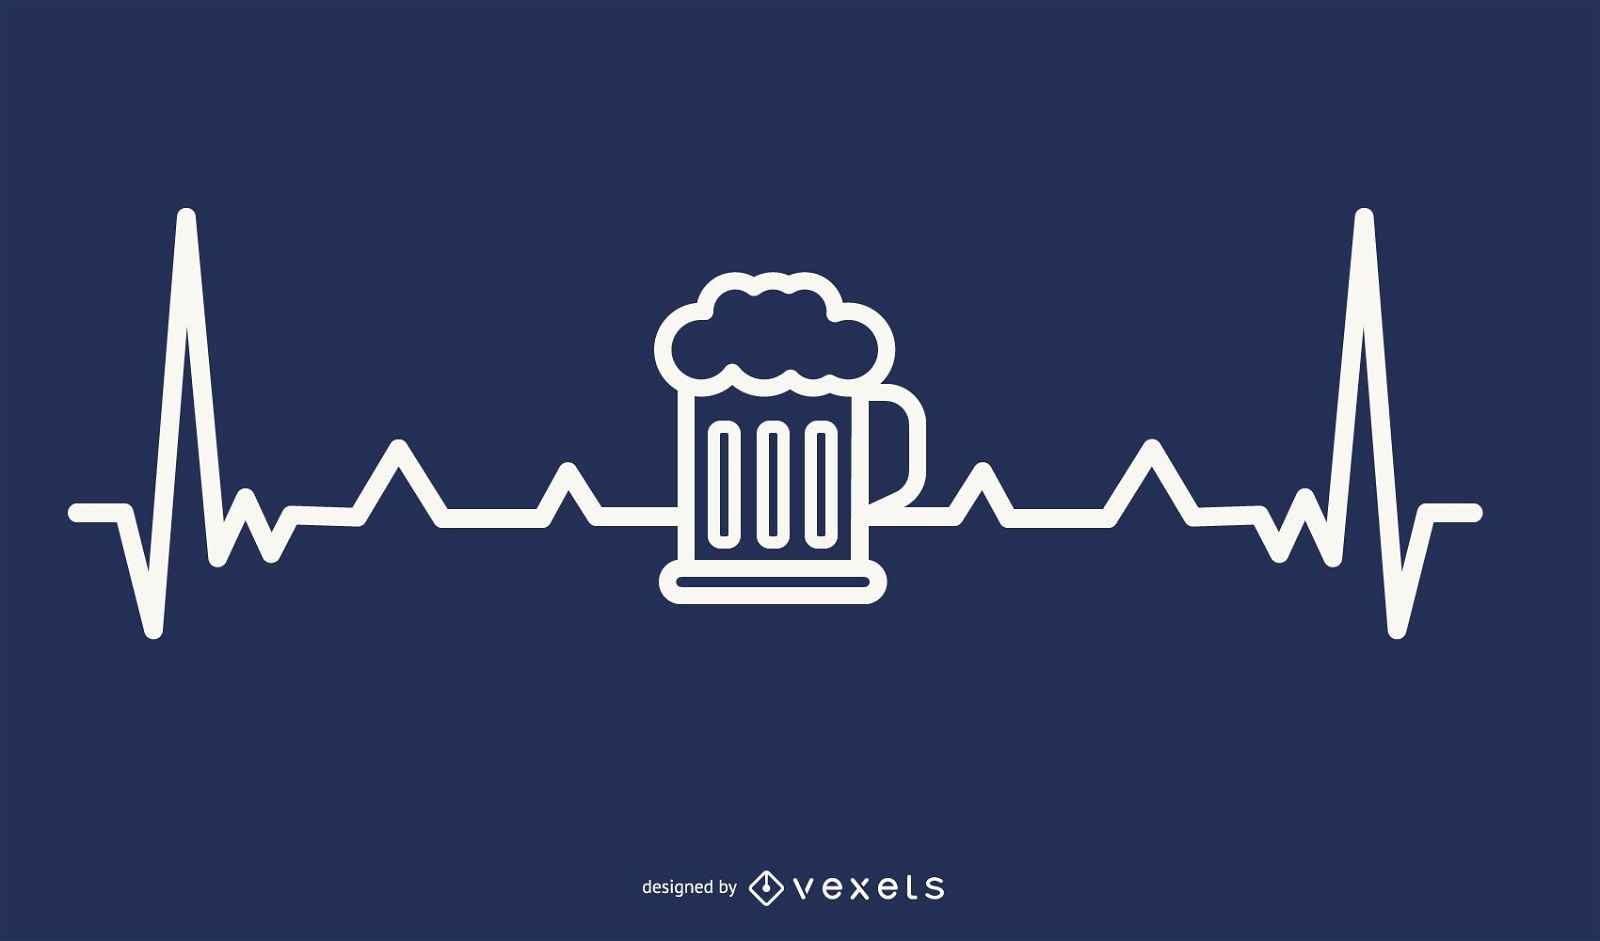 Beer with Heartbeat Design 